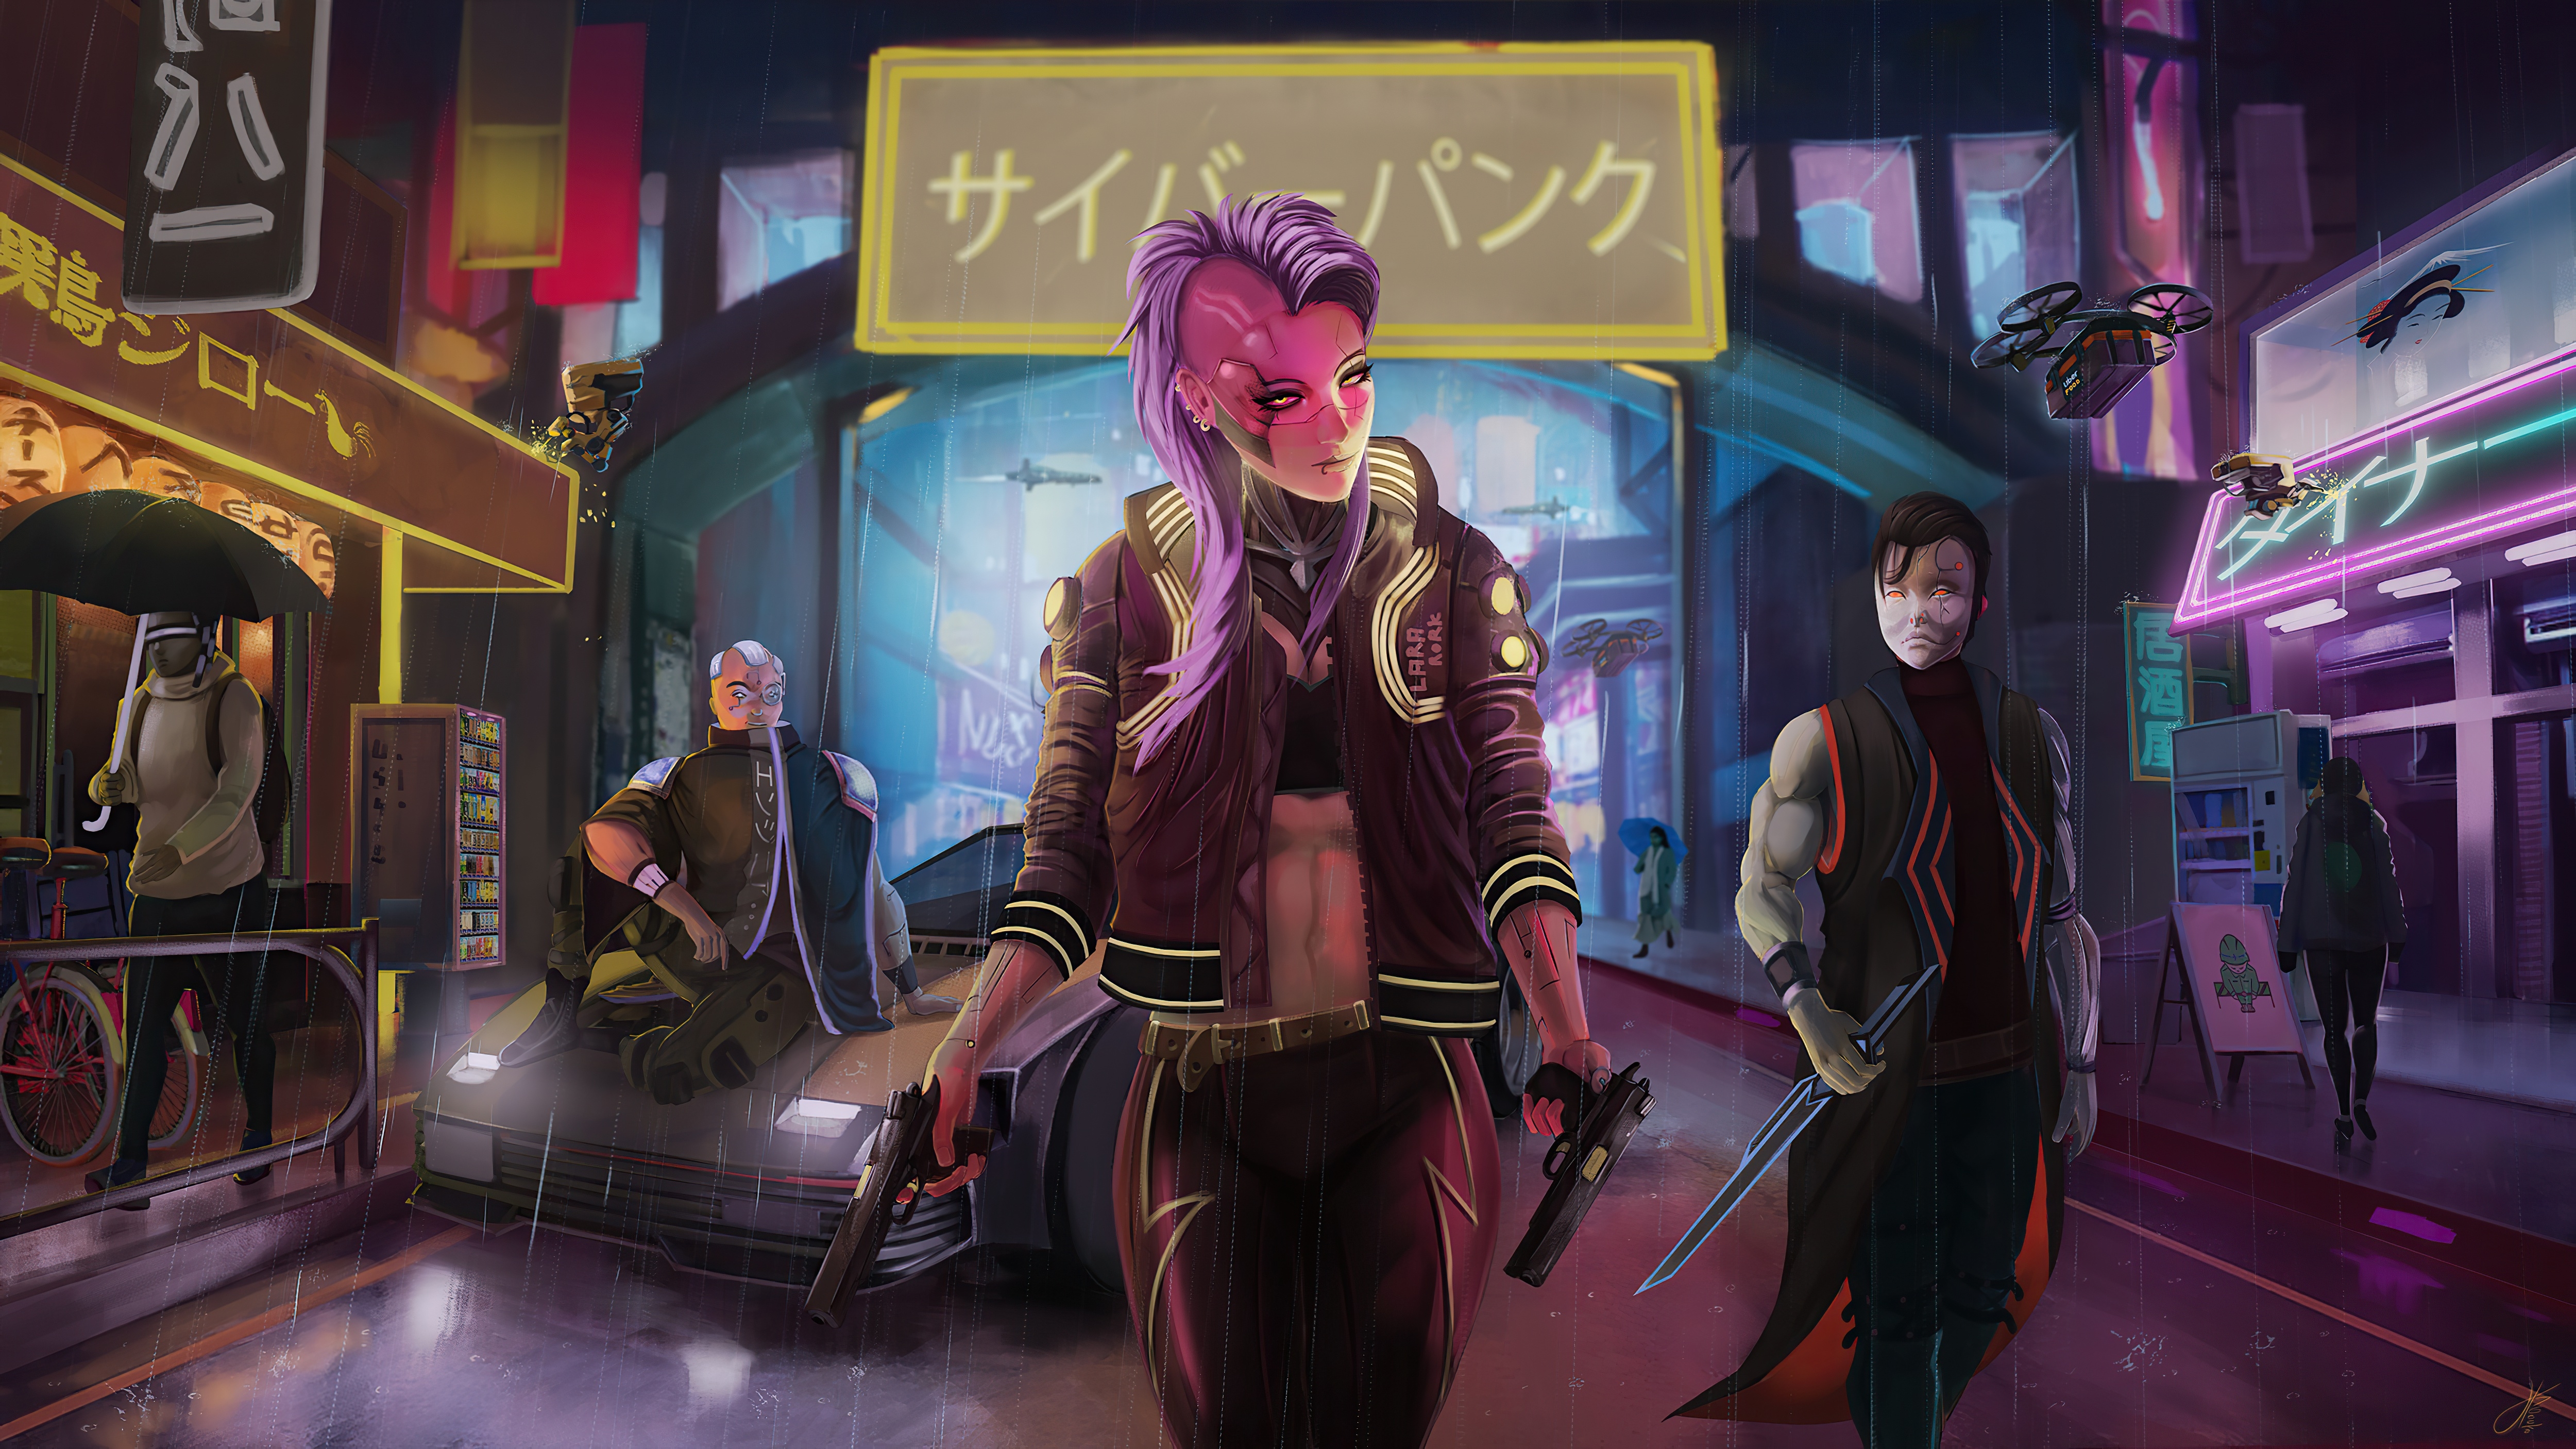 1242x26 Purple Hair Cyberpunk Girl 5k Iphone Xs Max Wallpaper Hd Games 4k Wallpapers Images Photos And Background